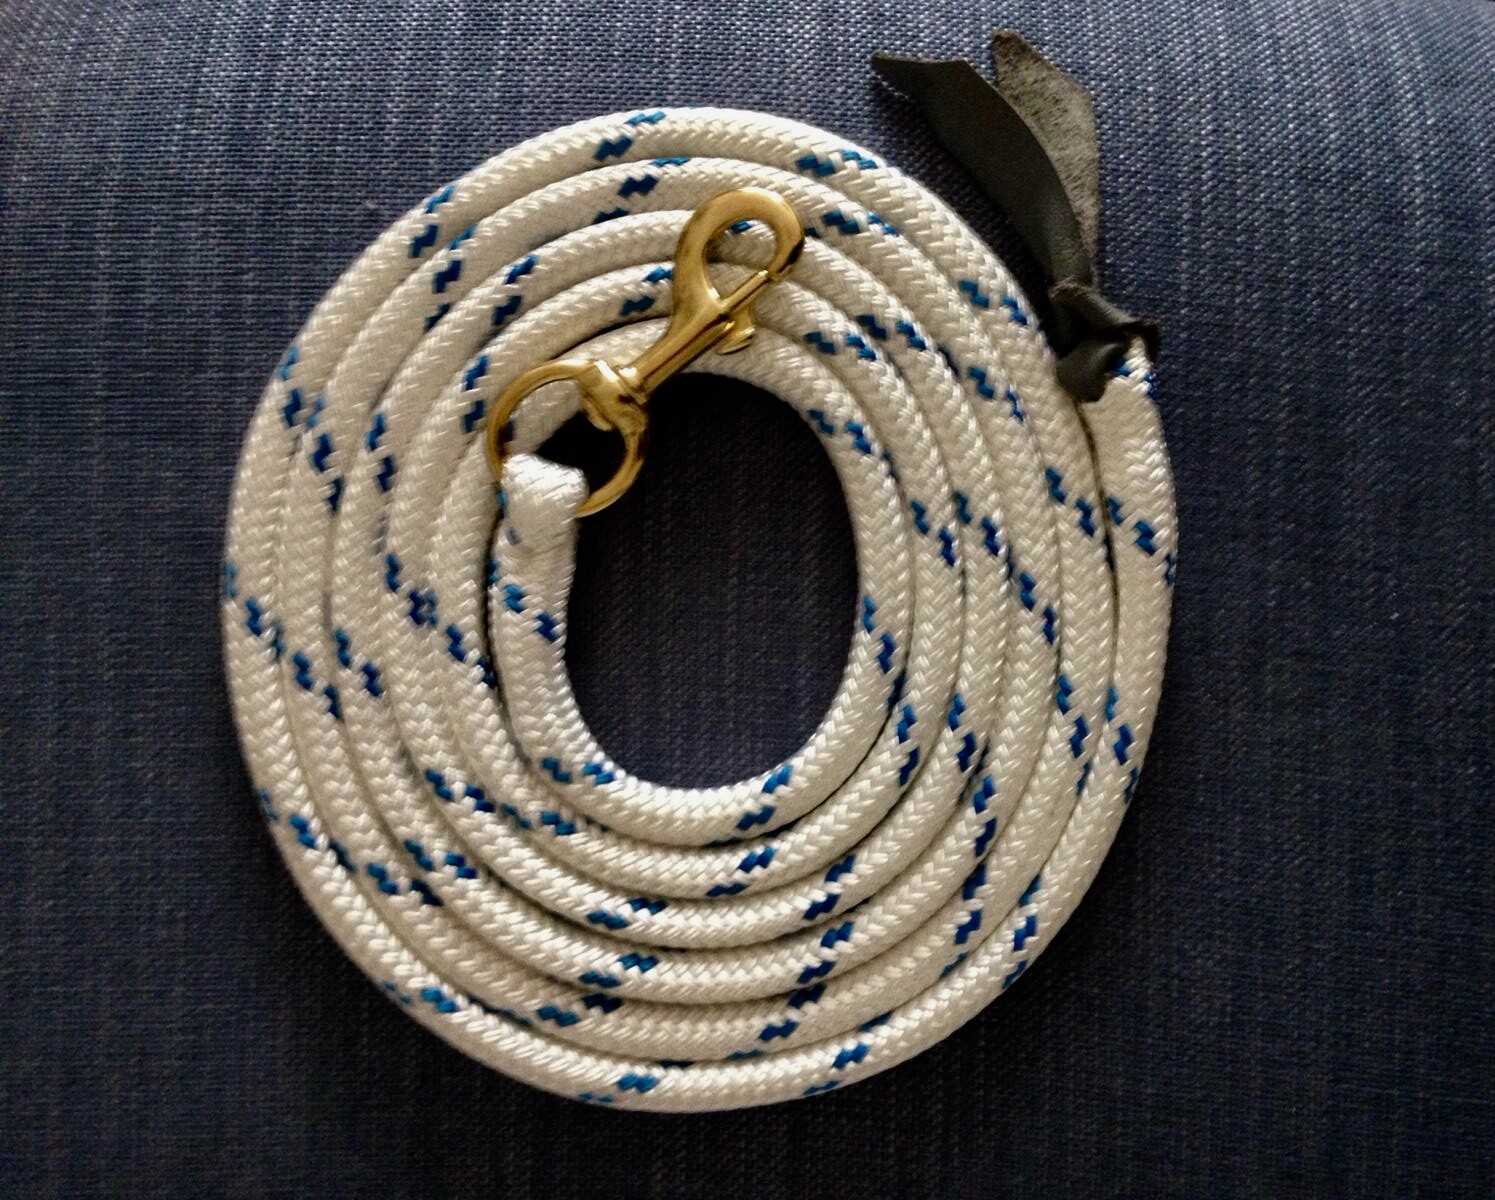 12ft Training rope.  
Price includes UK shipping costs. Please contact for international shipping .